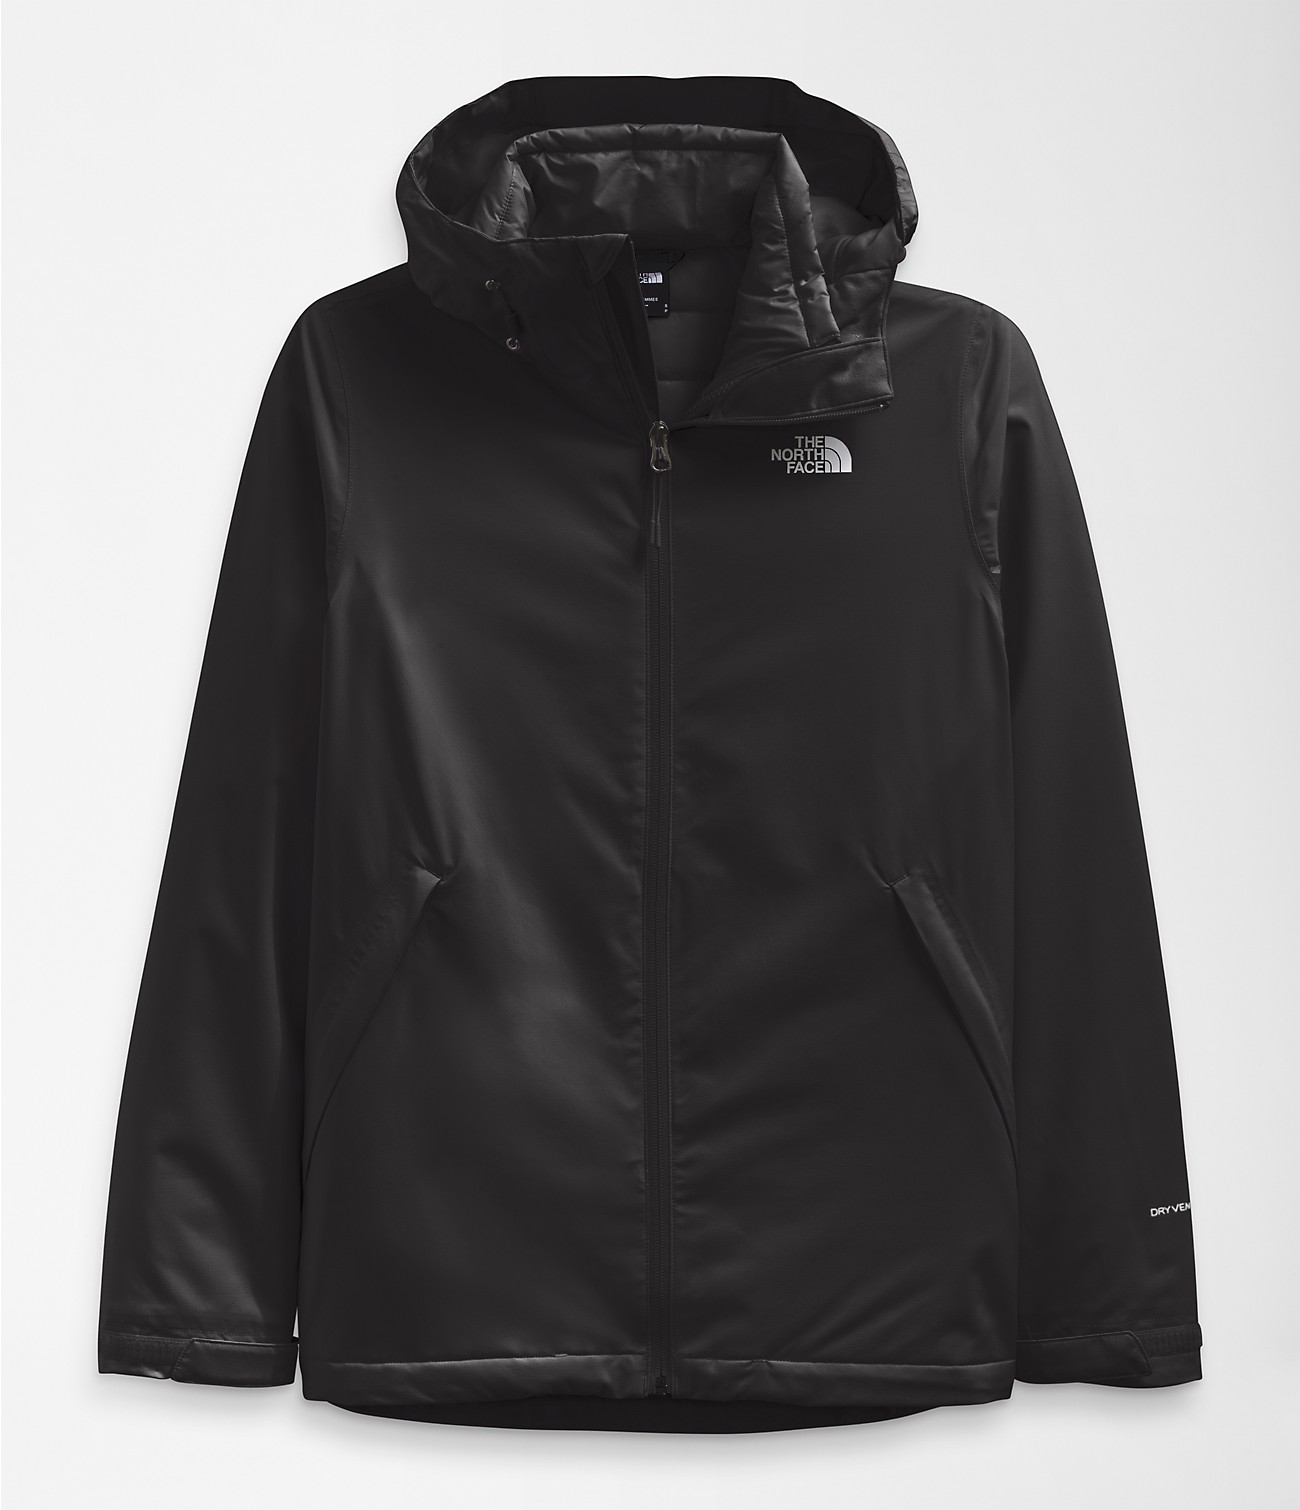 Unlock Wilderness' choice in the Jack Wolfskin Vs North Face comparison, the Carto Triclimate® Jacket by The North Face